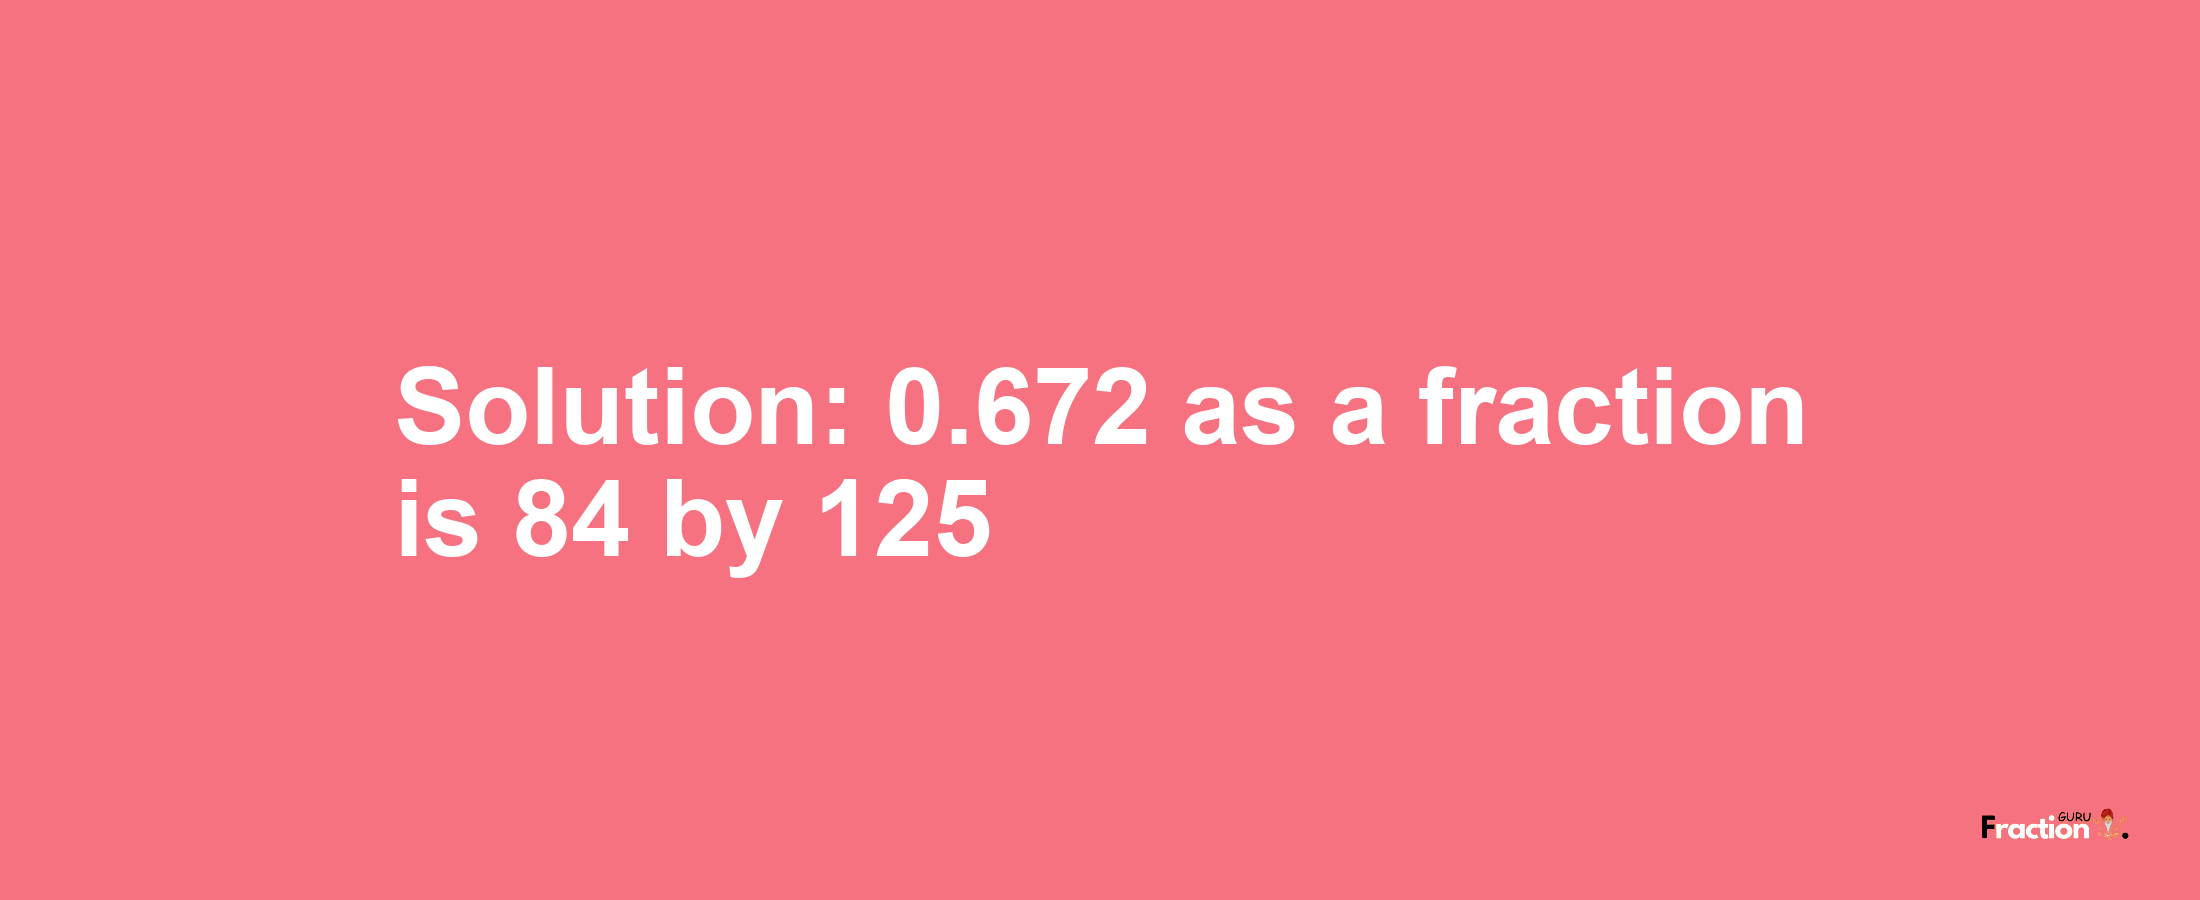 Solution:0.672 as a fraction is 84/125